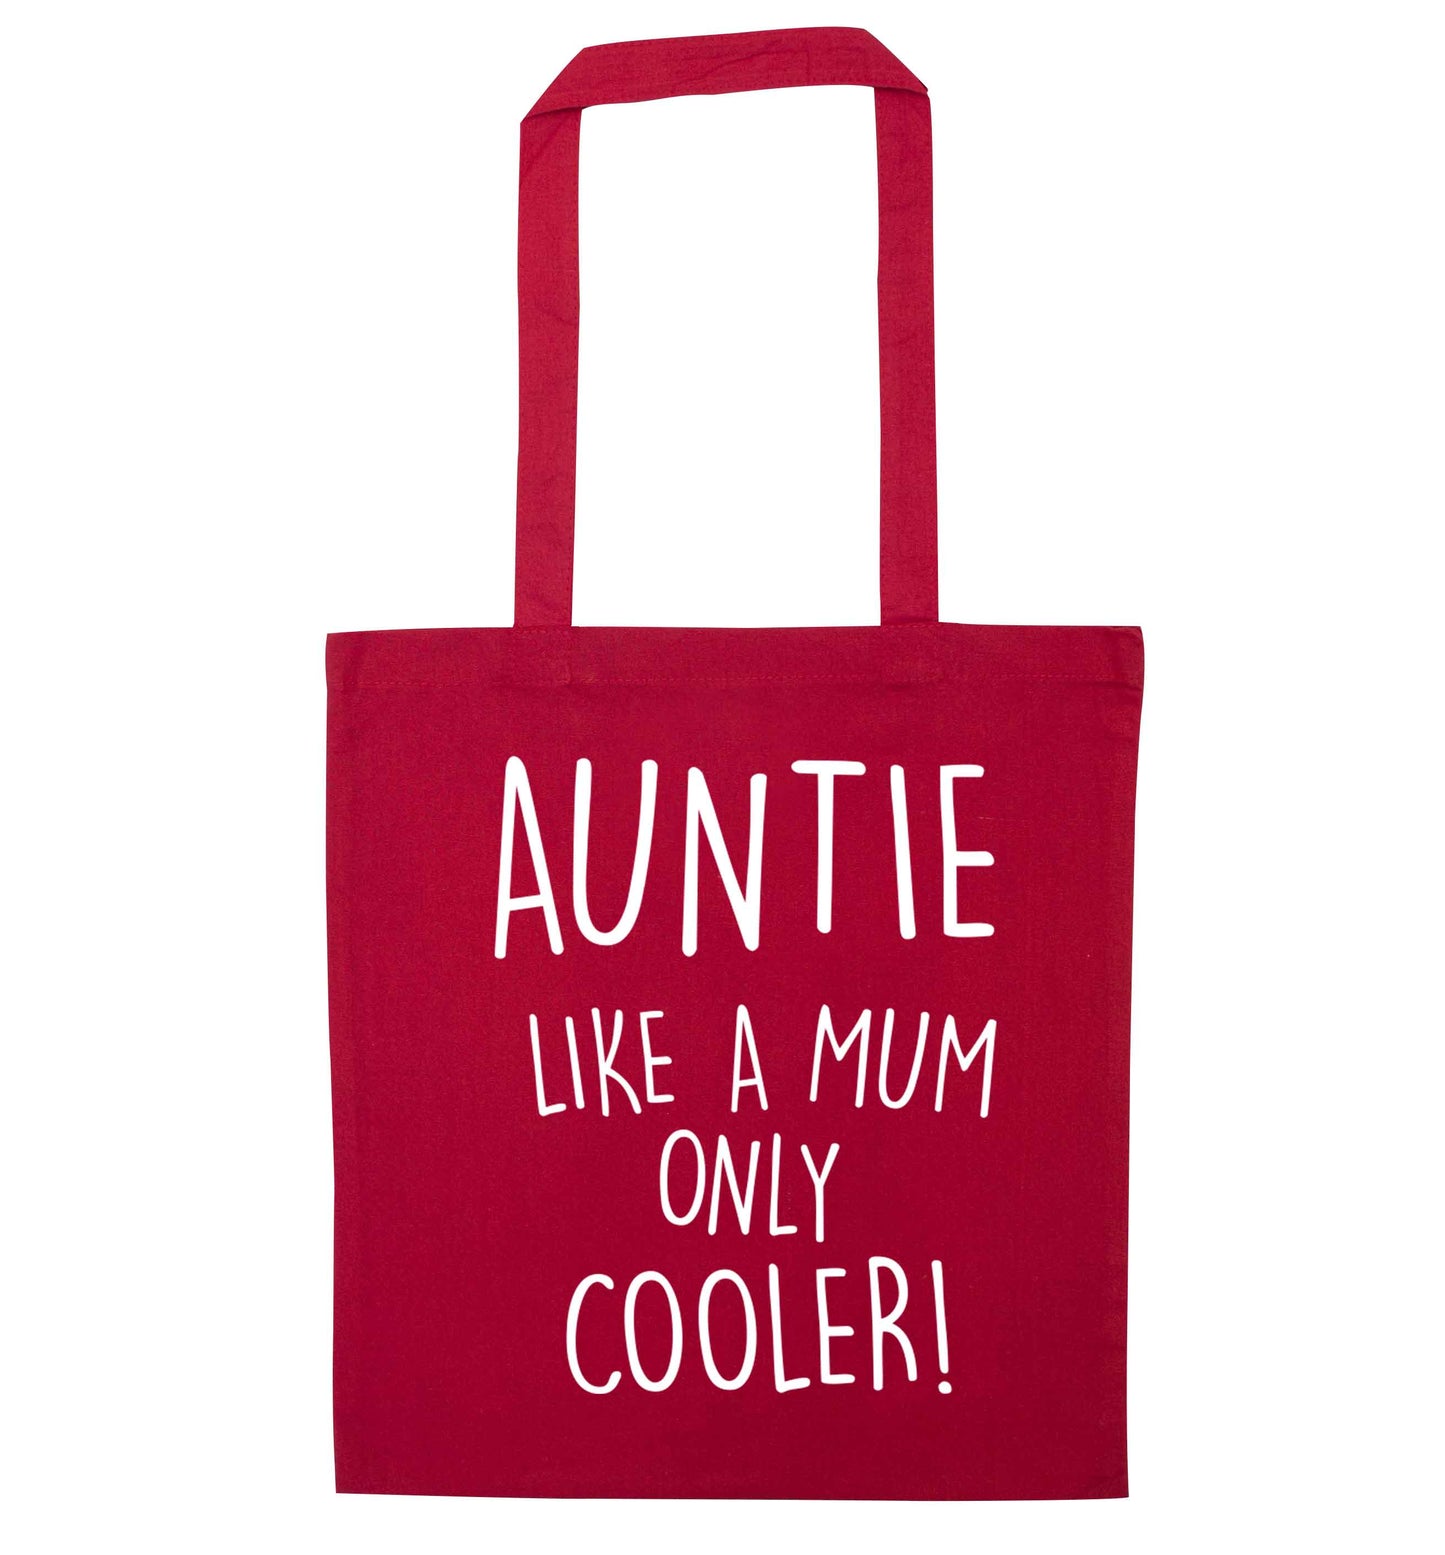 Auntie like a mum only cooler red tote bag